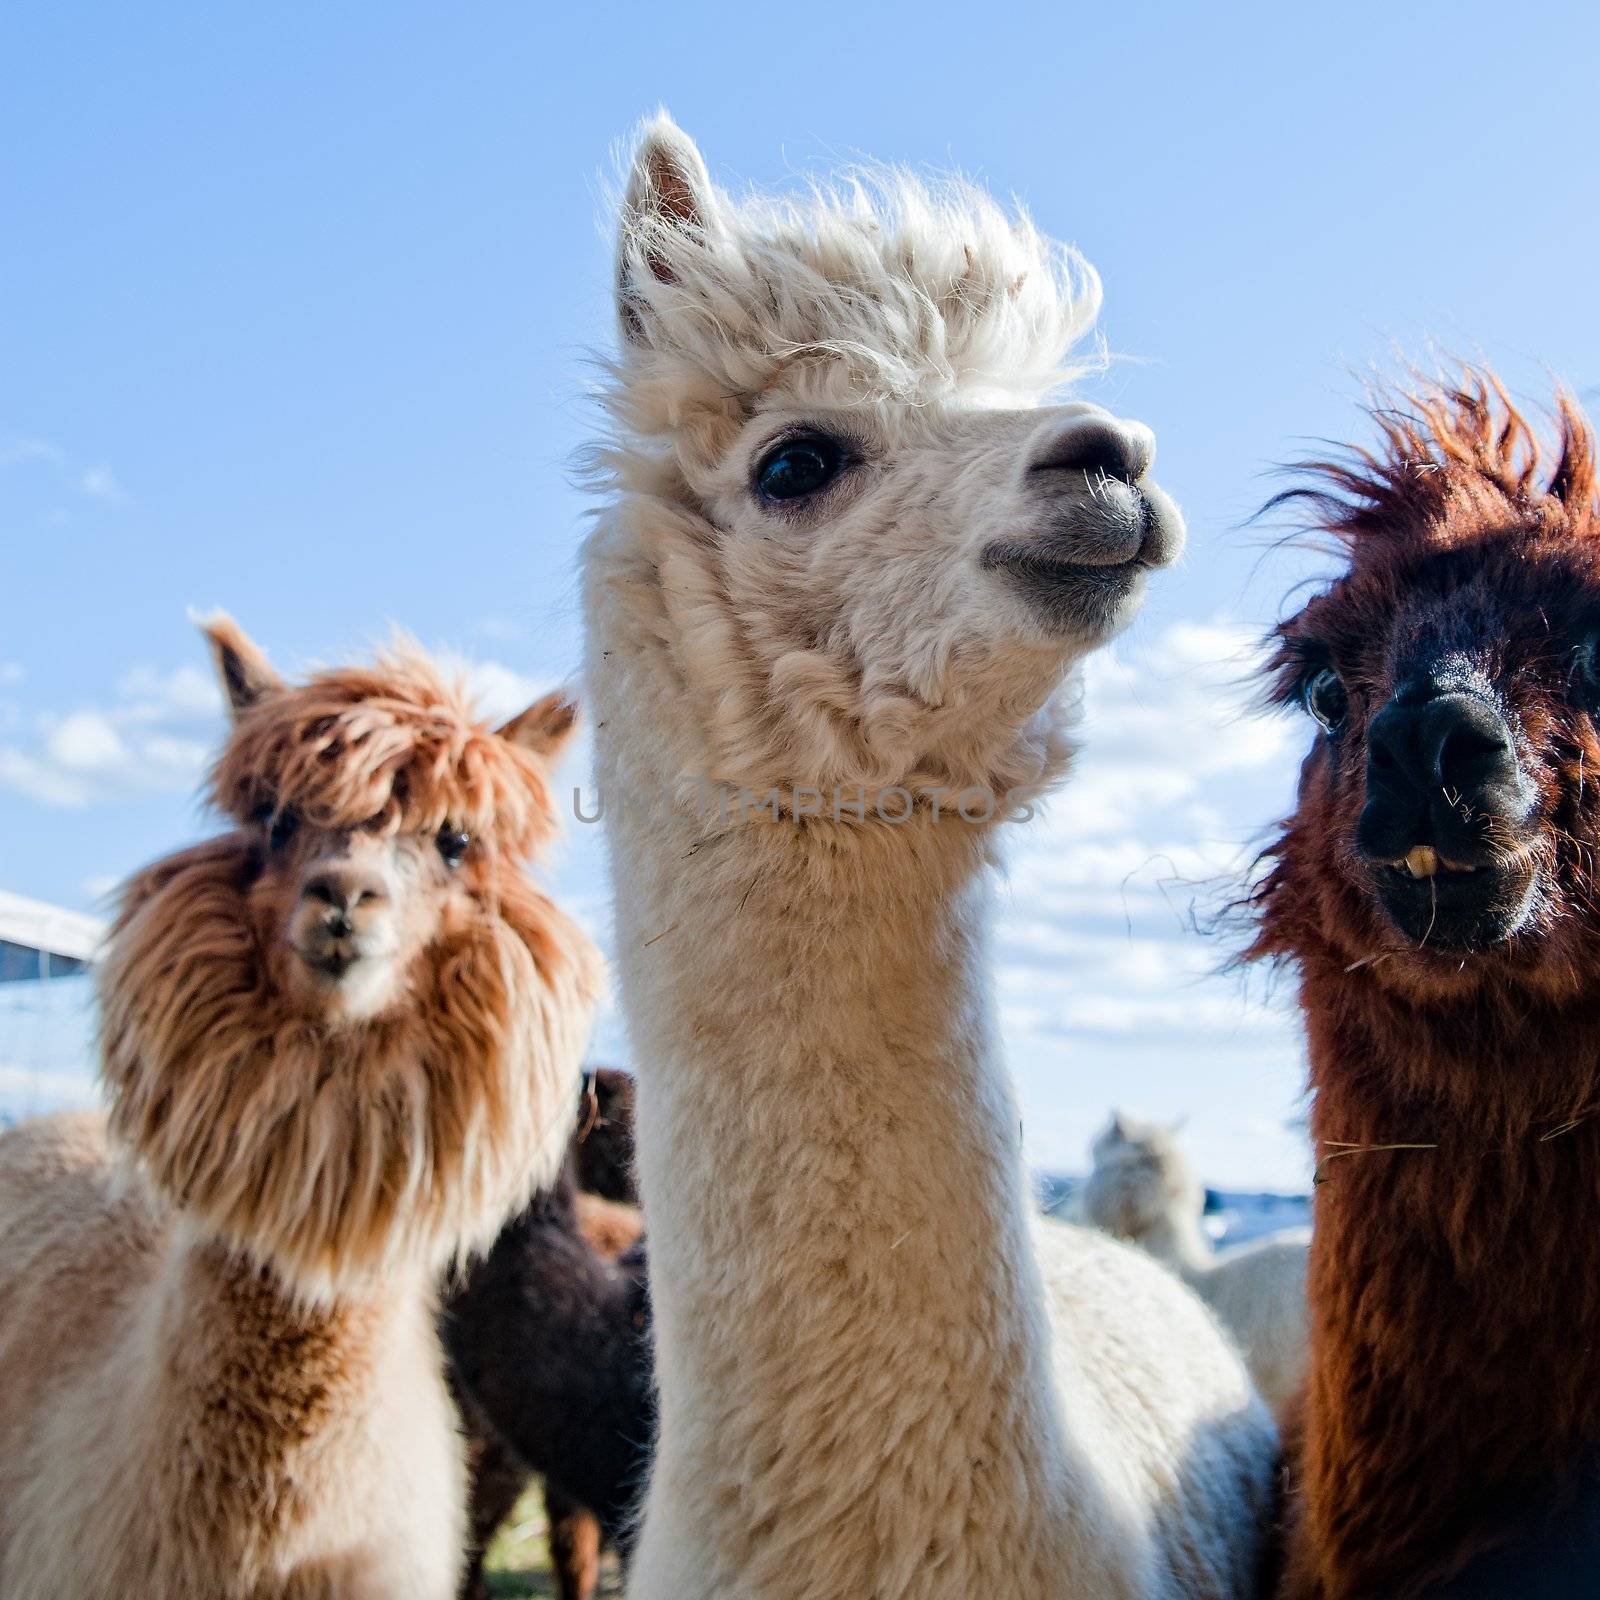 Three Funny Alpacas in different colors